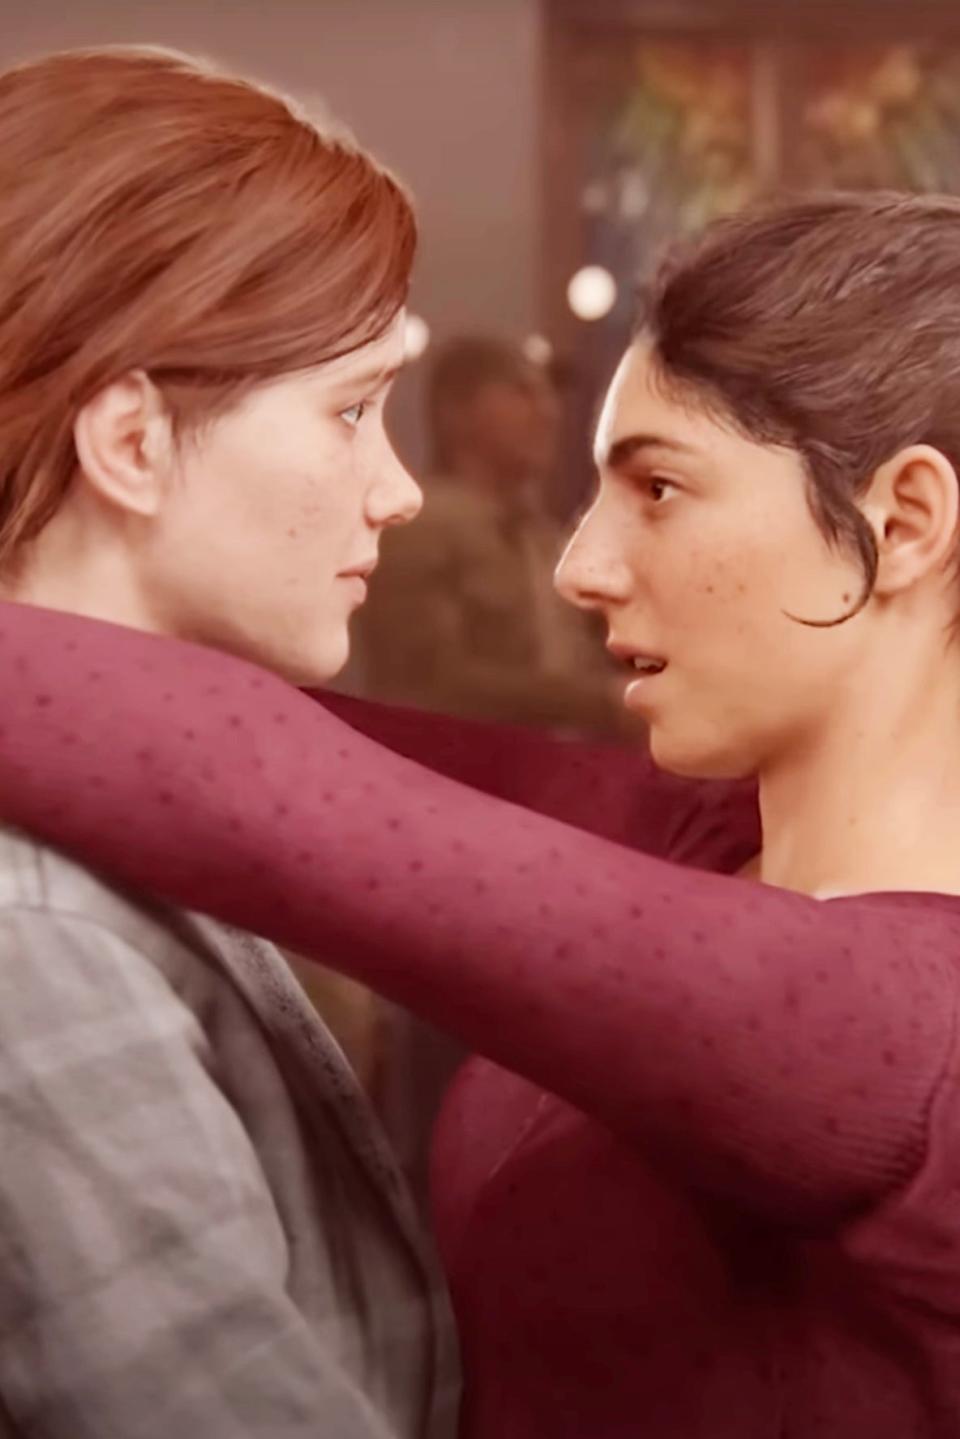 Ellie and Dina from The Last of Us are close, about to kiss, showing an intimate moment between the characters